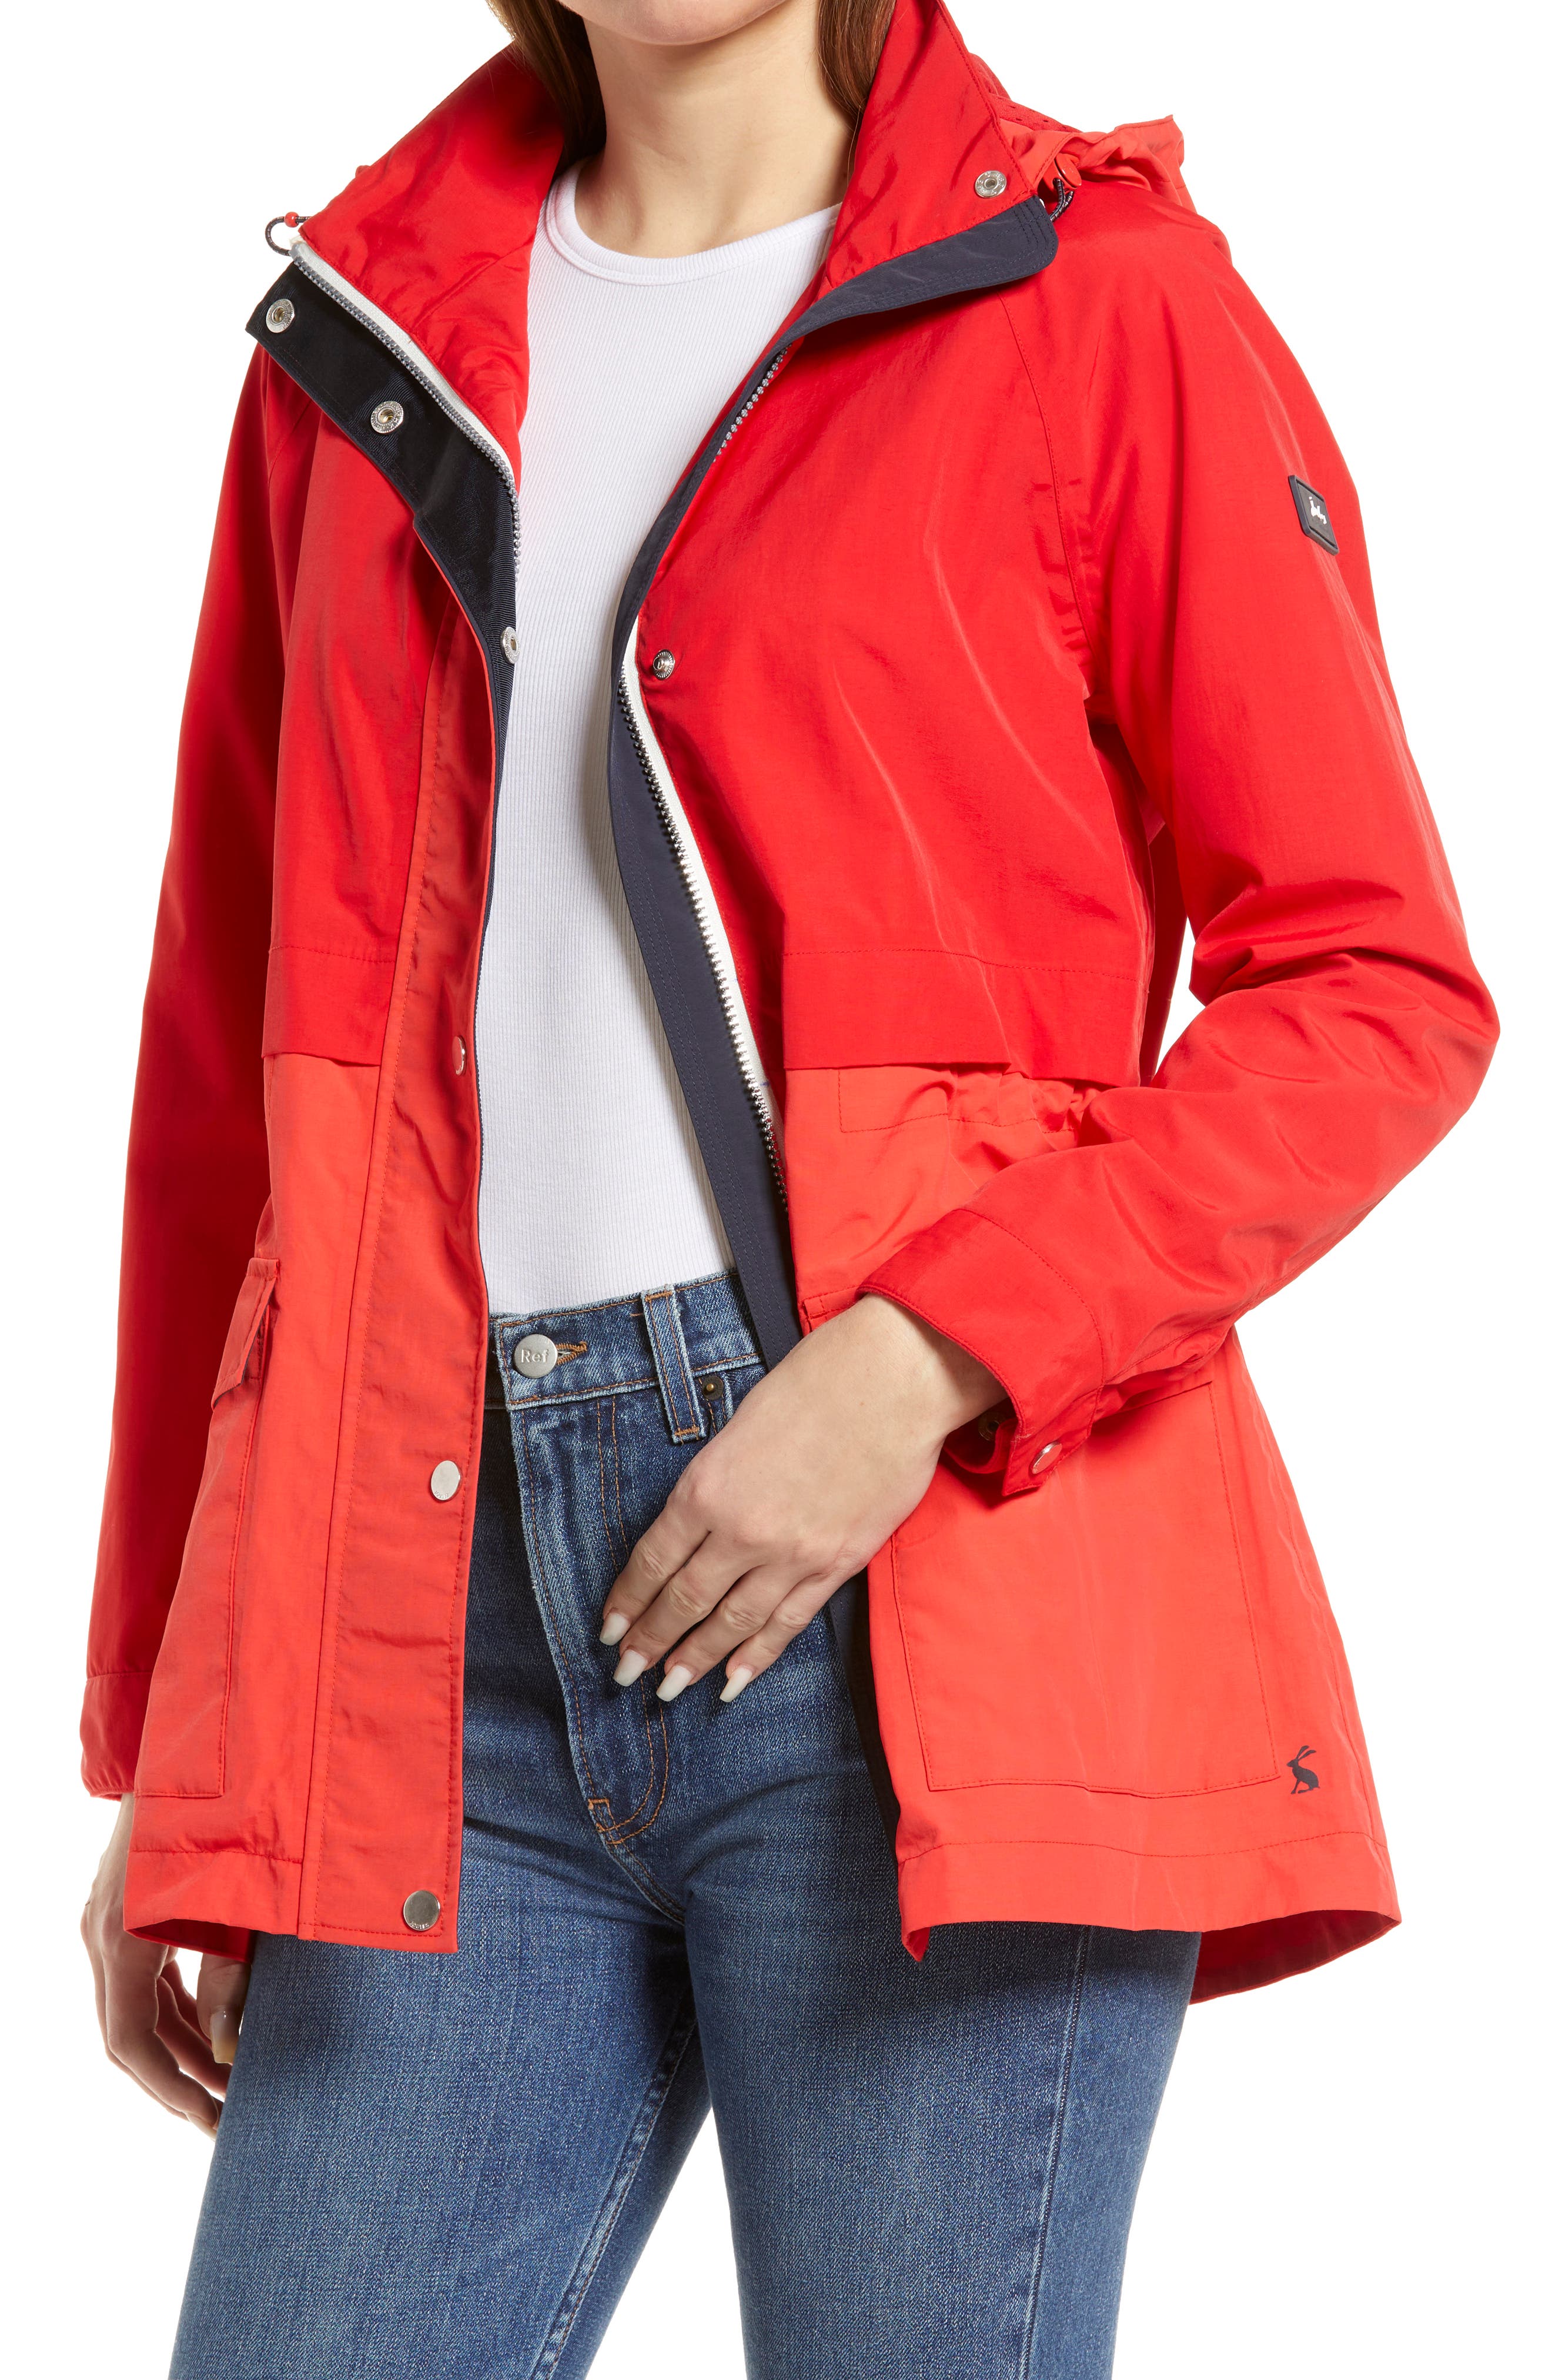 RRD Luxury Fashion Womens Outerwear Jacket Spring Red 